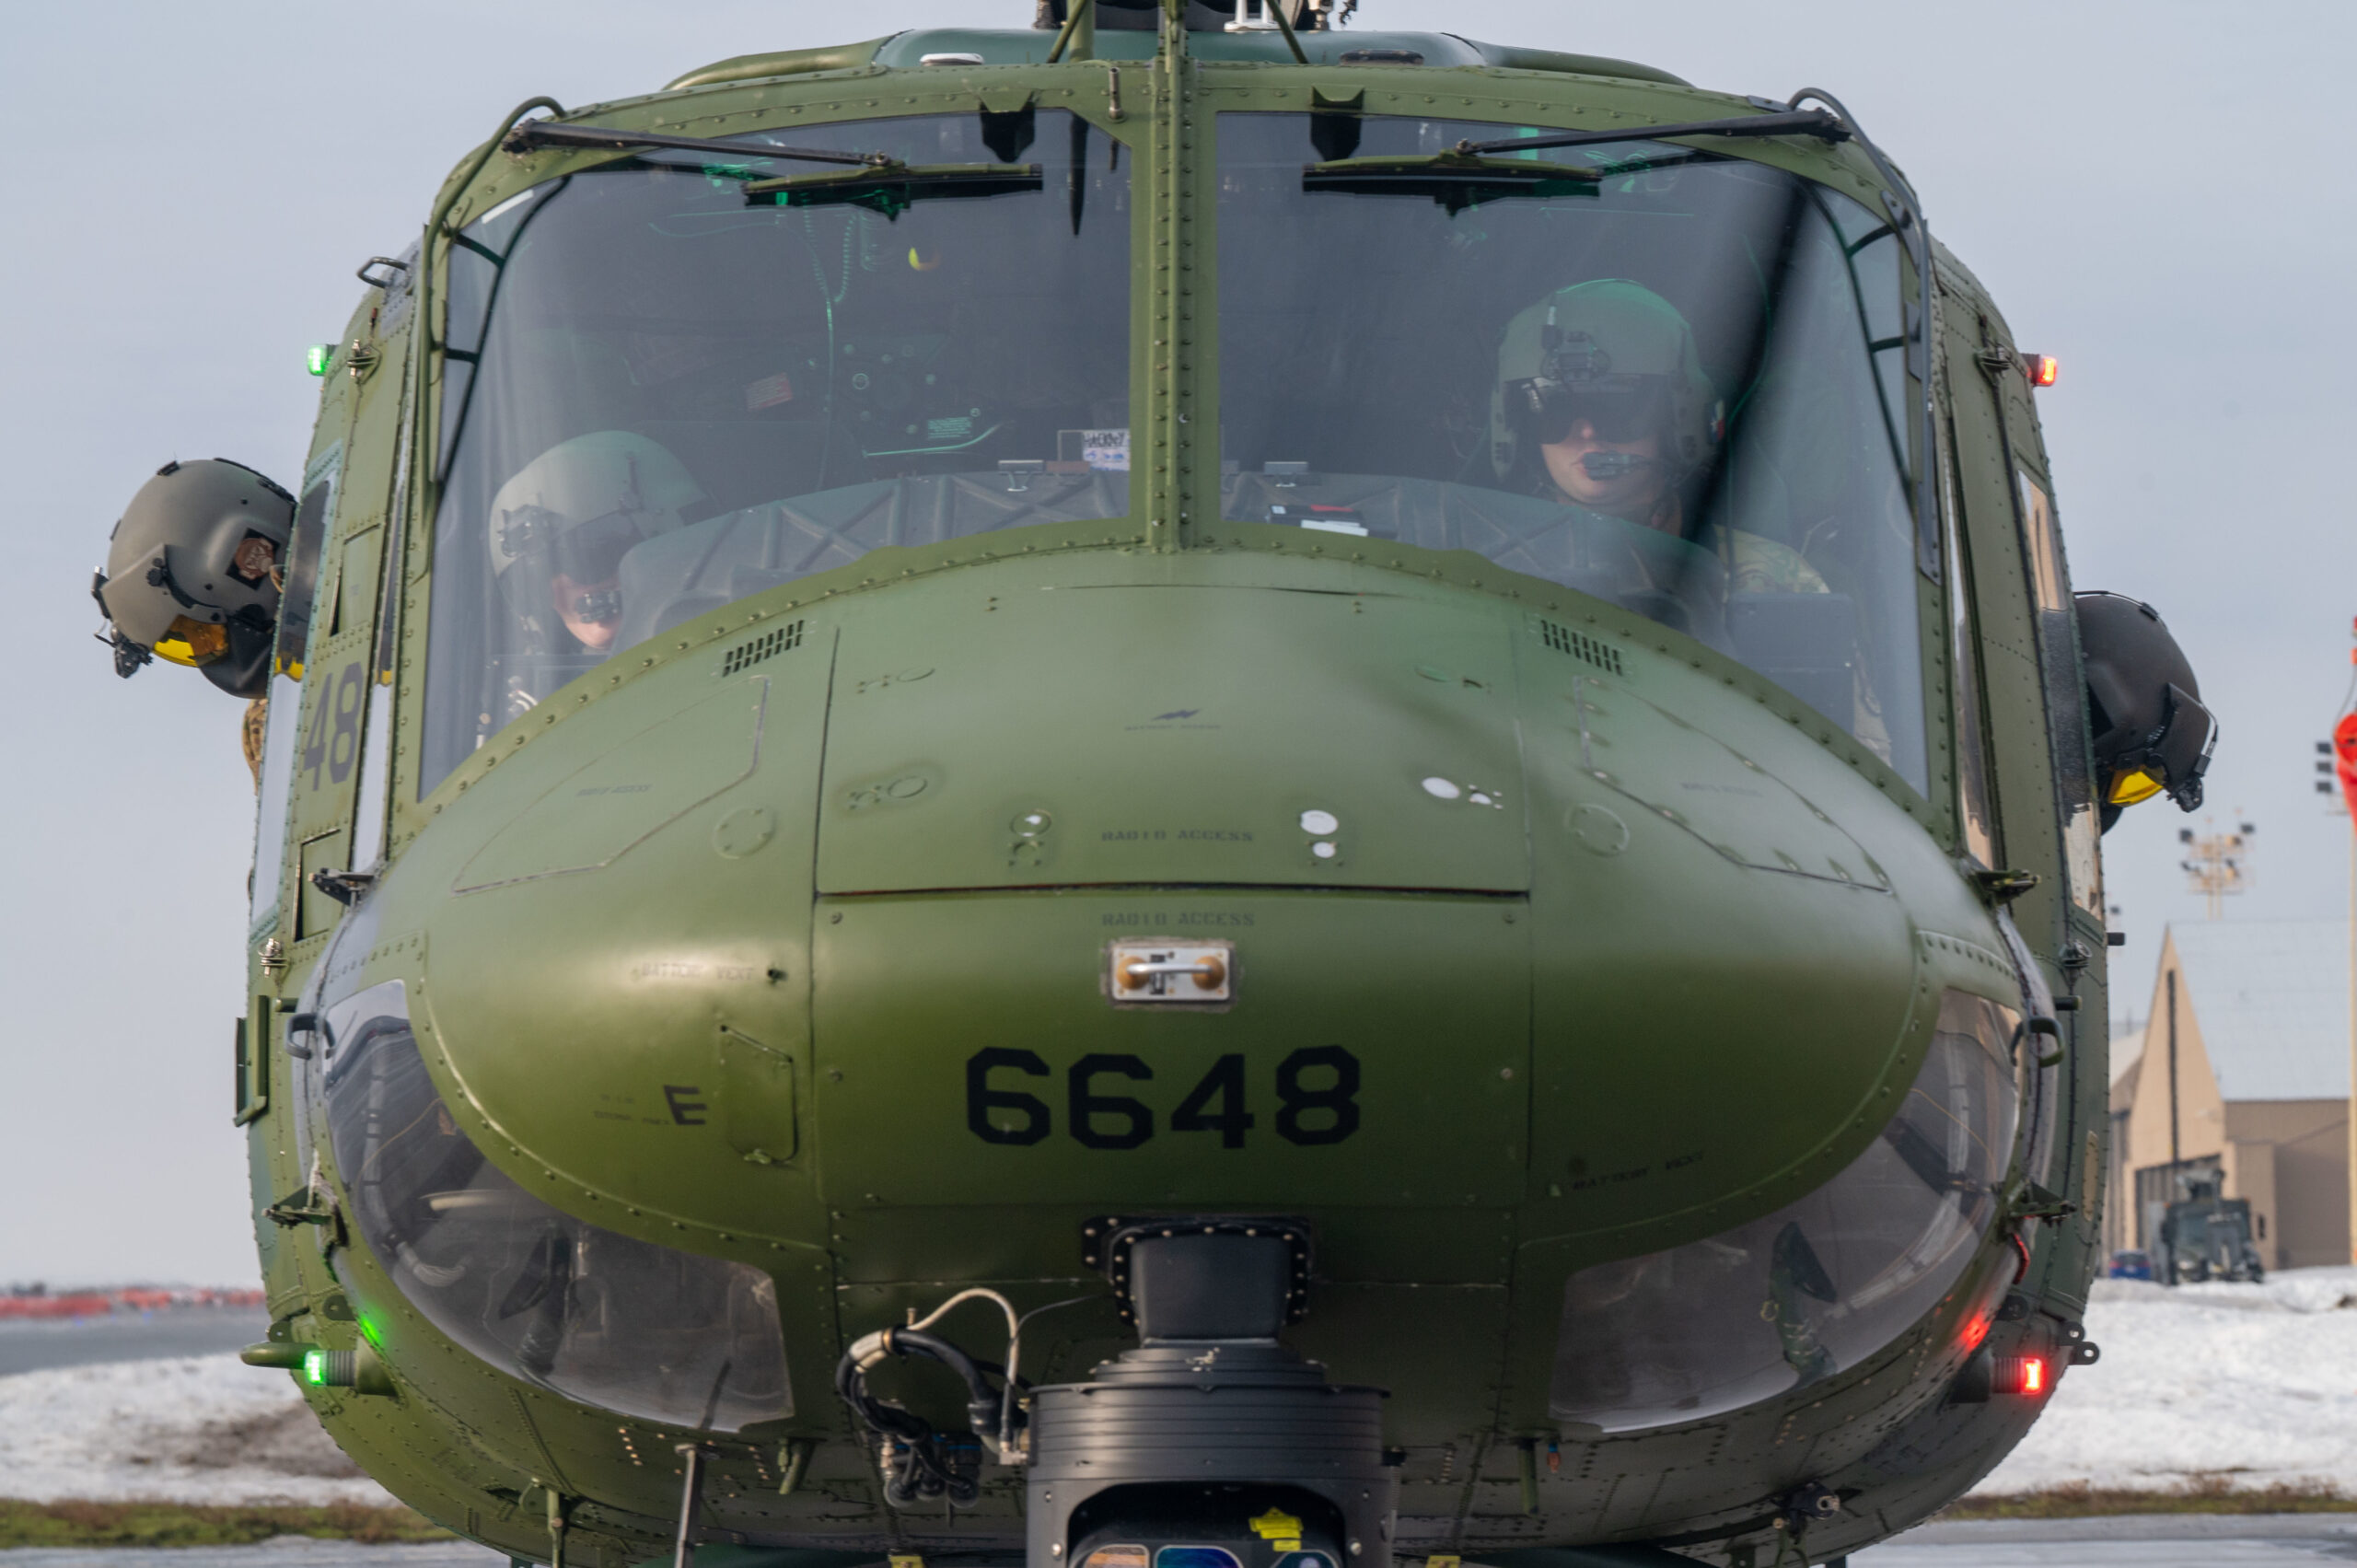 A U.S. Air Force crew from 36th Rescue Squadron prepares for takeoff with UH-1N Huey number 6648 to reach 20,000 flight hours at Fairchild Air Force Base, Washington, Jan. 13, 2023. The 36th RQS completed 759 flights in 2022, with its fleet of UH-1Ns averaging 18,000 hours total flight time. (U.S. Air Force photo by Airman 1st Class Stassney Davis)